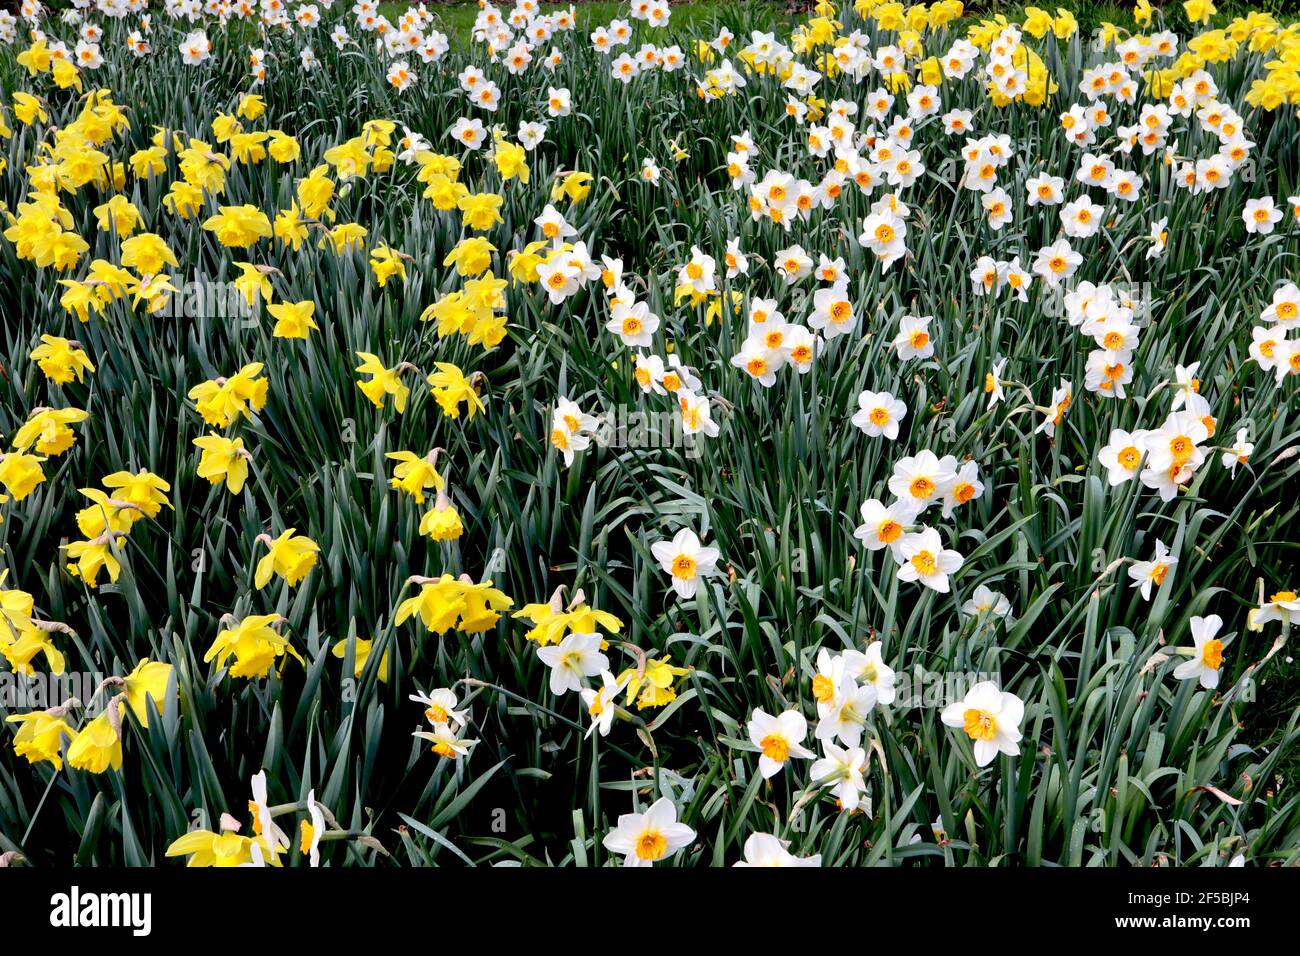 Narcissus / Daffodil ‘Barrett Browning’ Narcissus / Daffodil ‘Dutch Master’ March, Angleterre, Royaume-Uni Banque D'Images